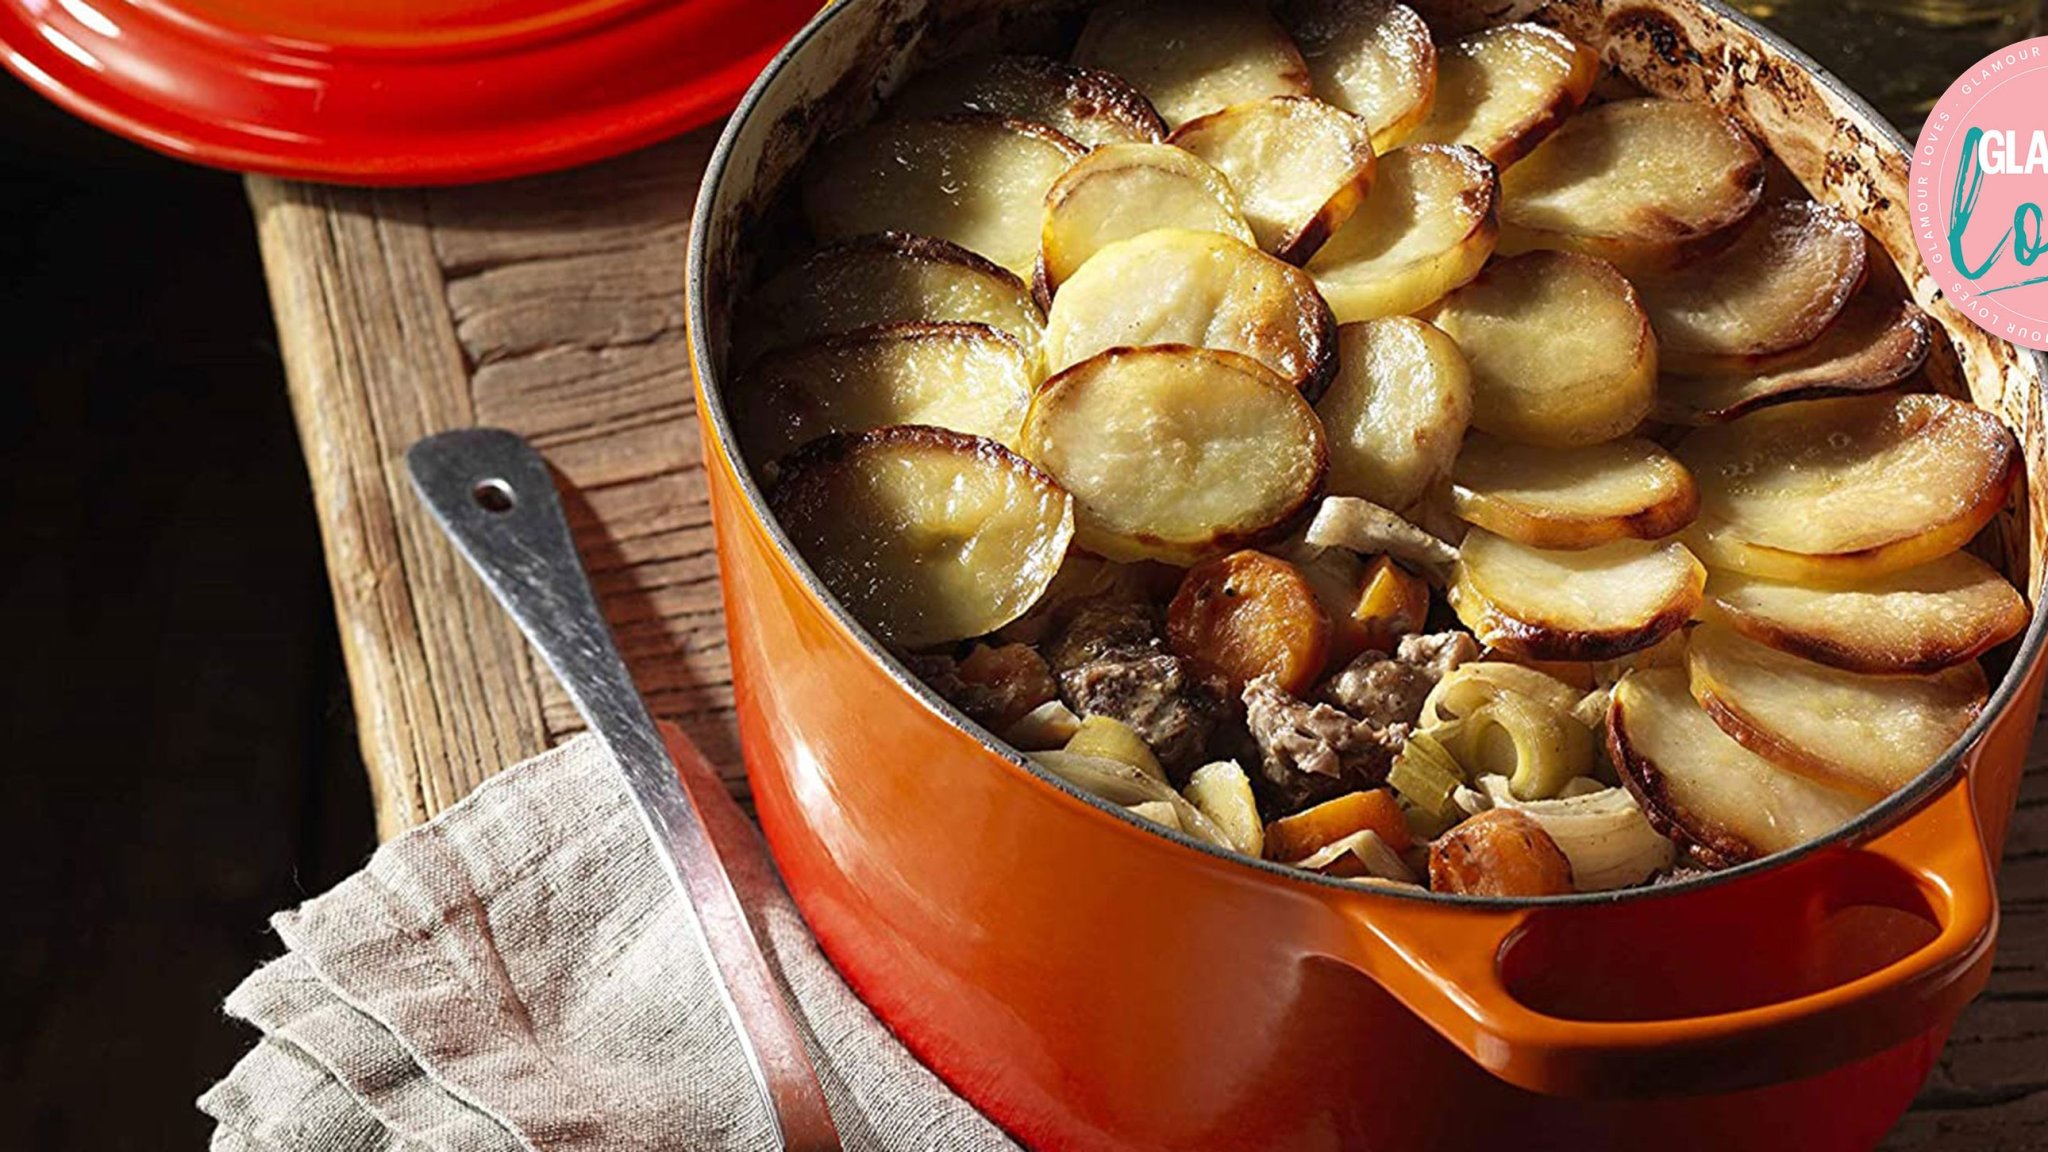 The best saucepan sets to inspire your inner chef that are actually worth your money